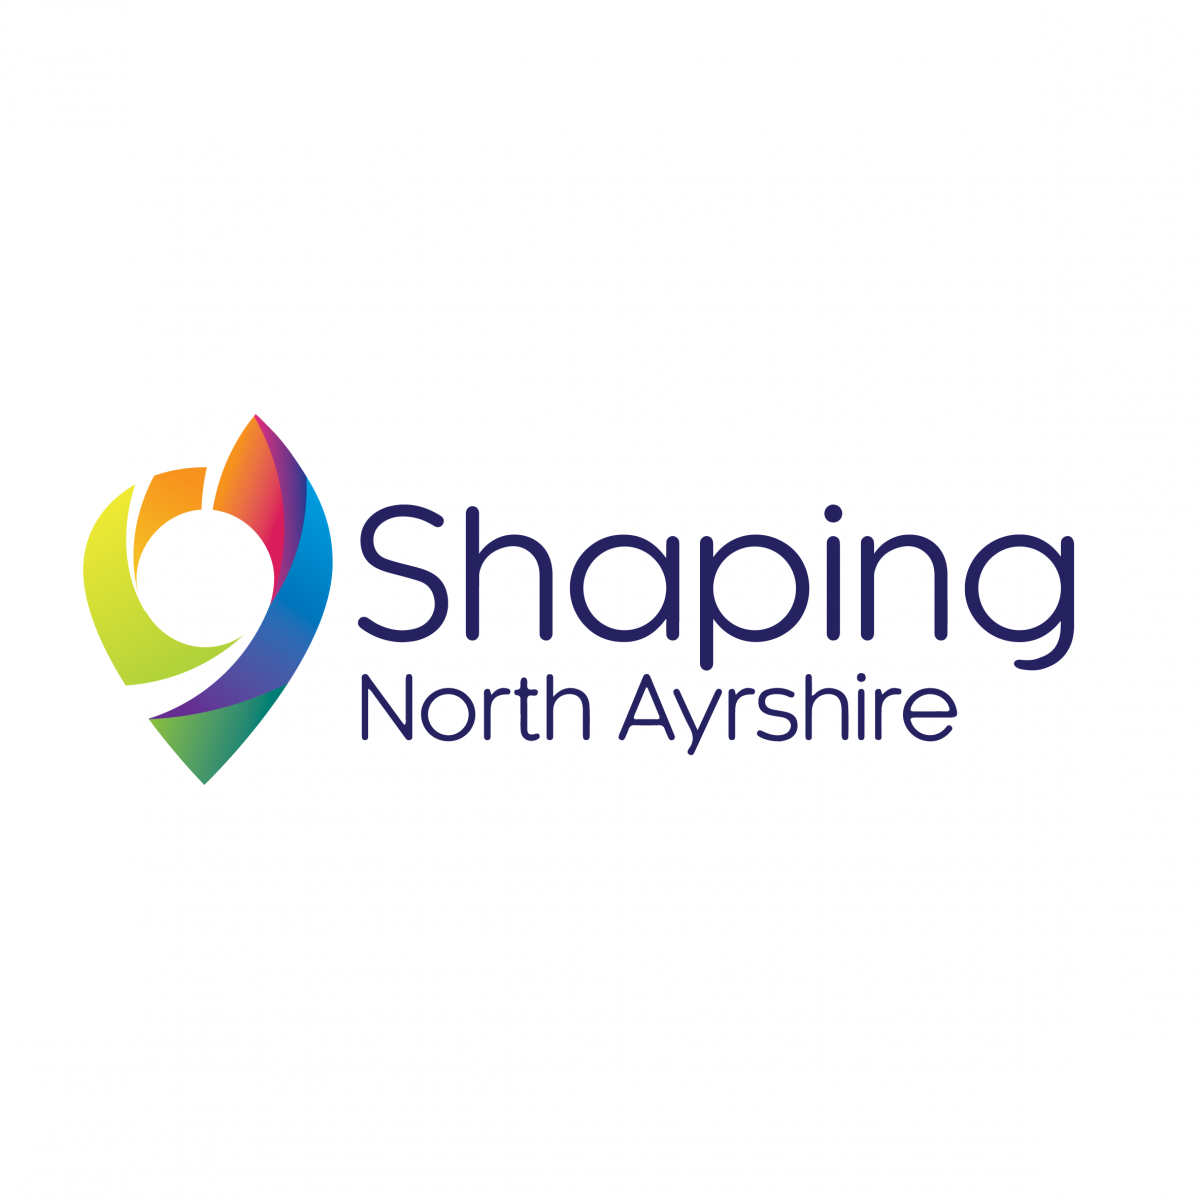 How To Vote in Shaping North Ayrshire